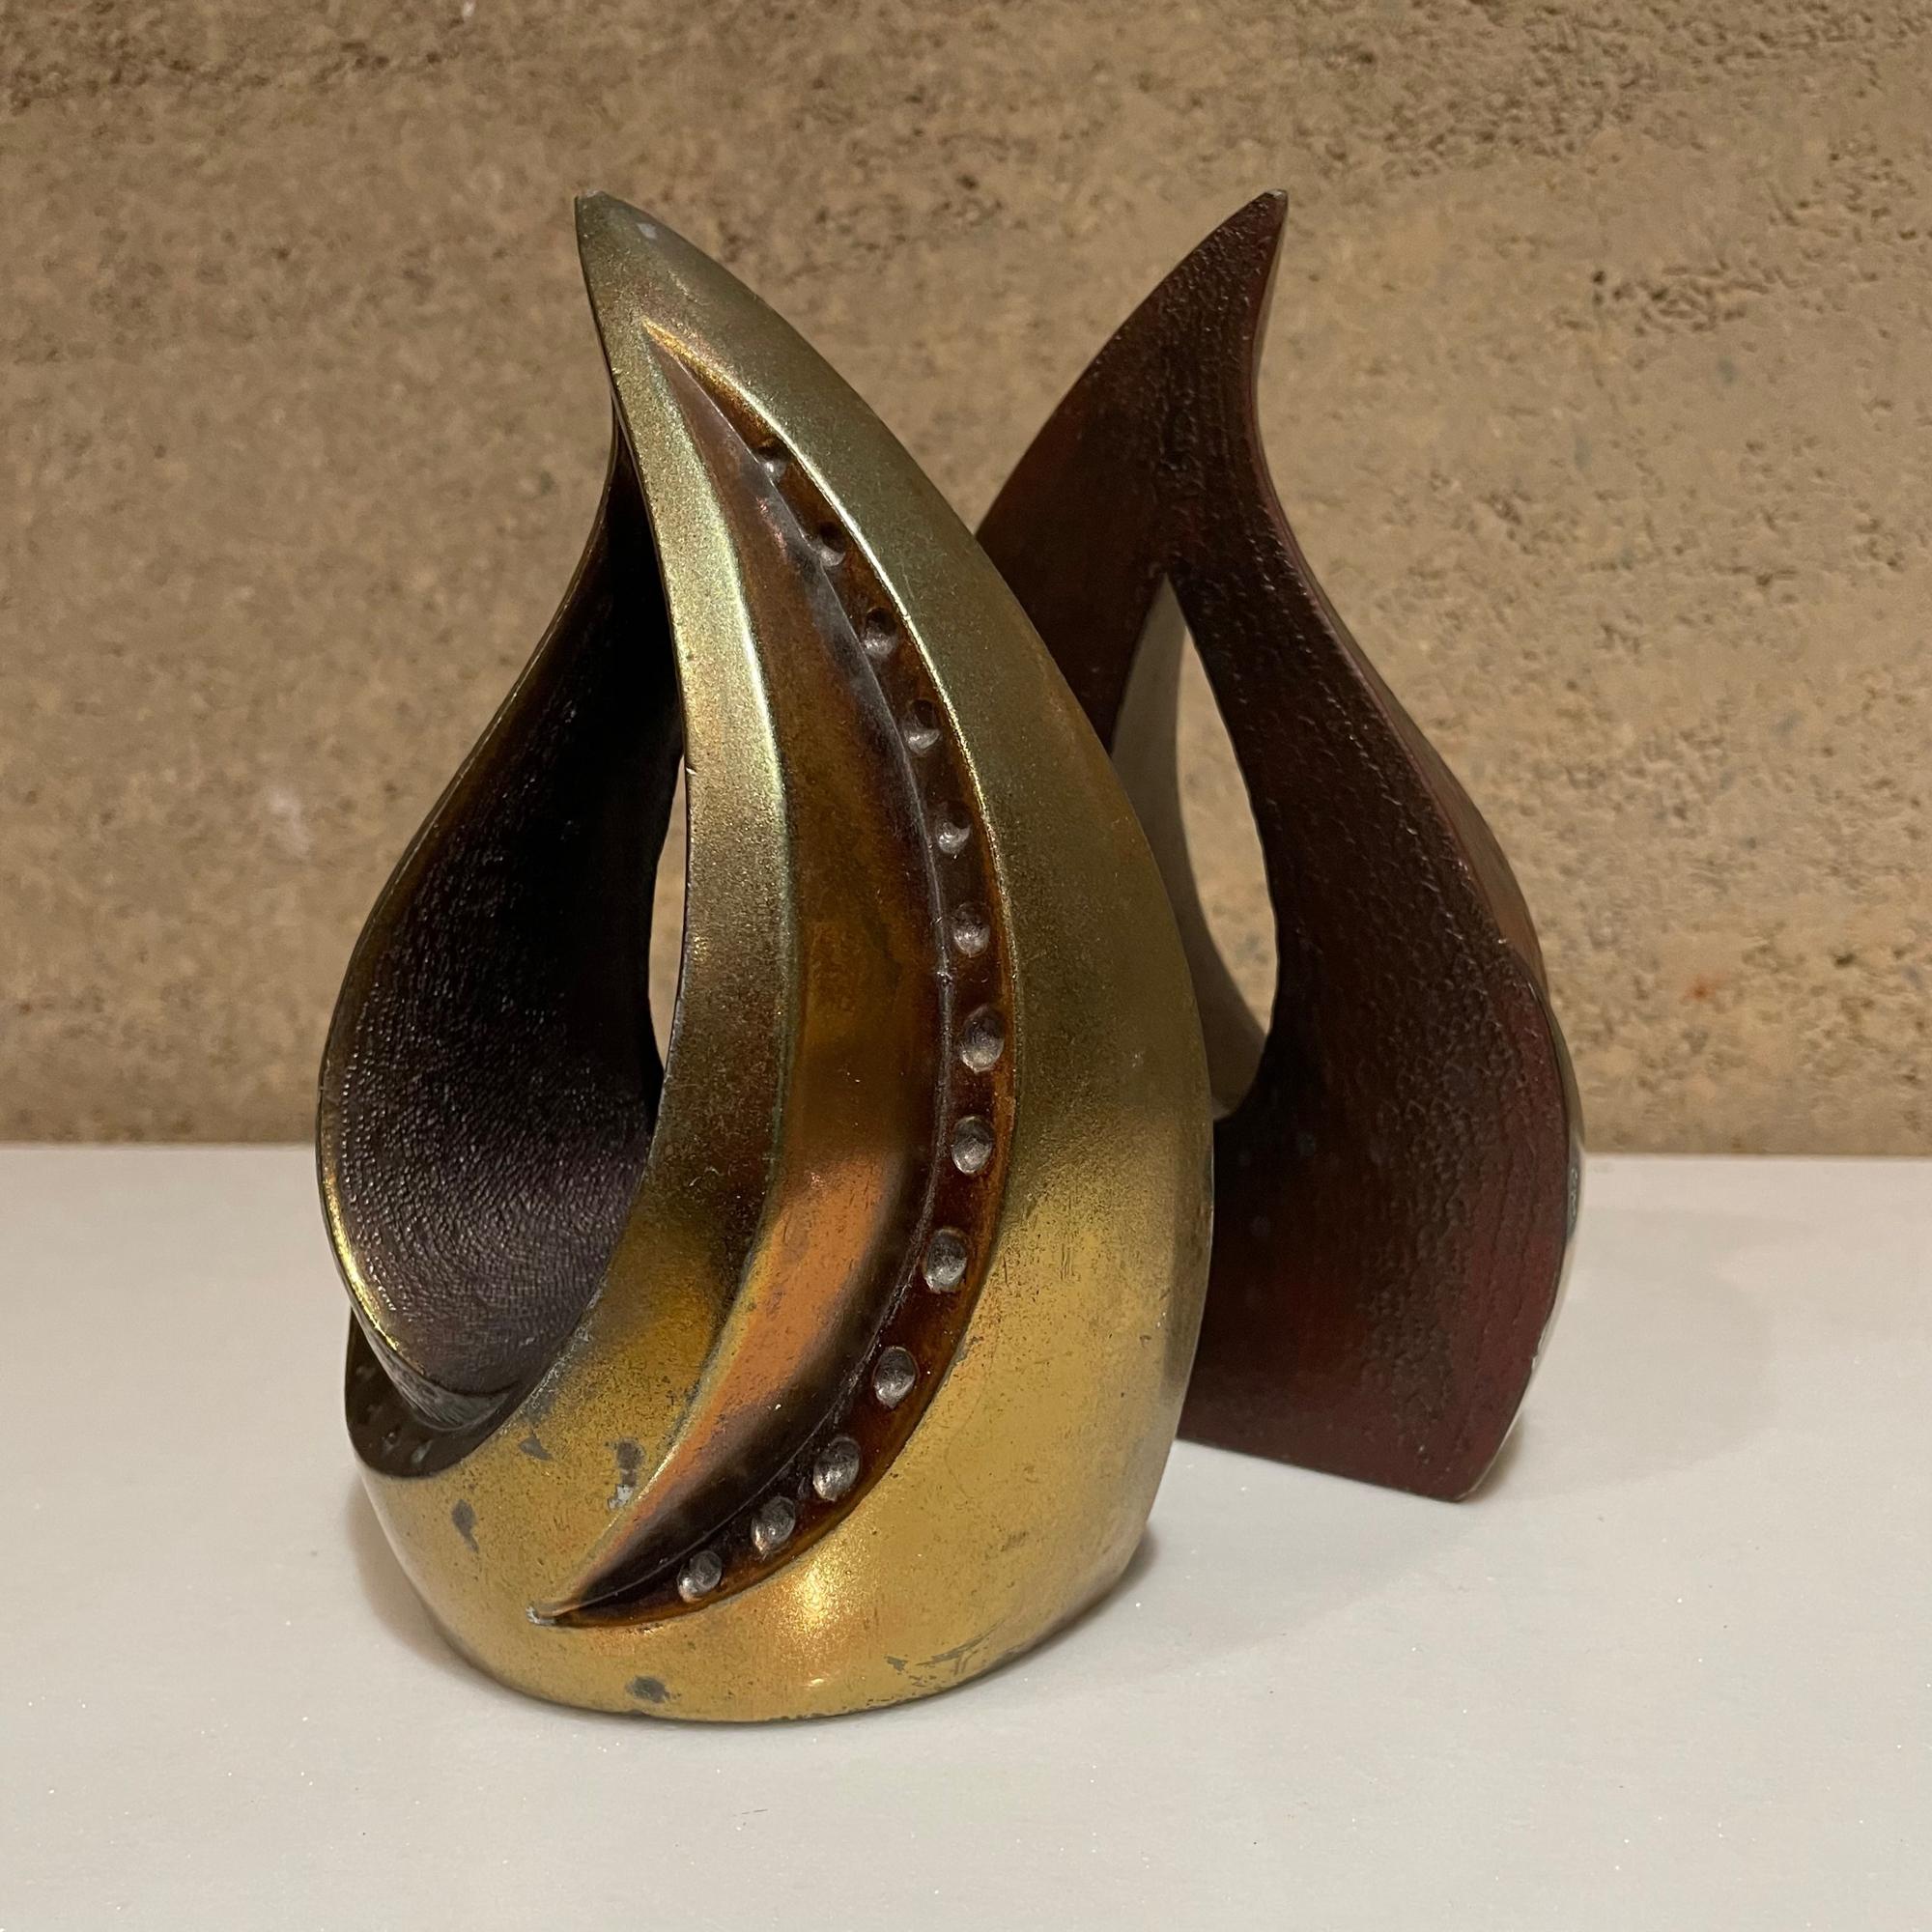 Brass bookends
1950s Ben Seibel modern bookends tear drop flame in brass 
Selling a pair.
Measures: 7.5 H x 4.5 W x 2.25 D inches
Preowned original unrestored vintage condition. 
Review images provided.